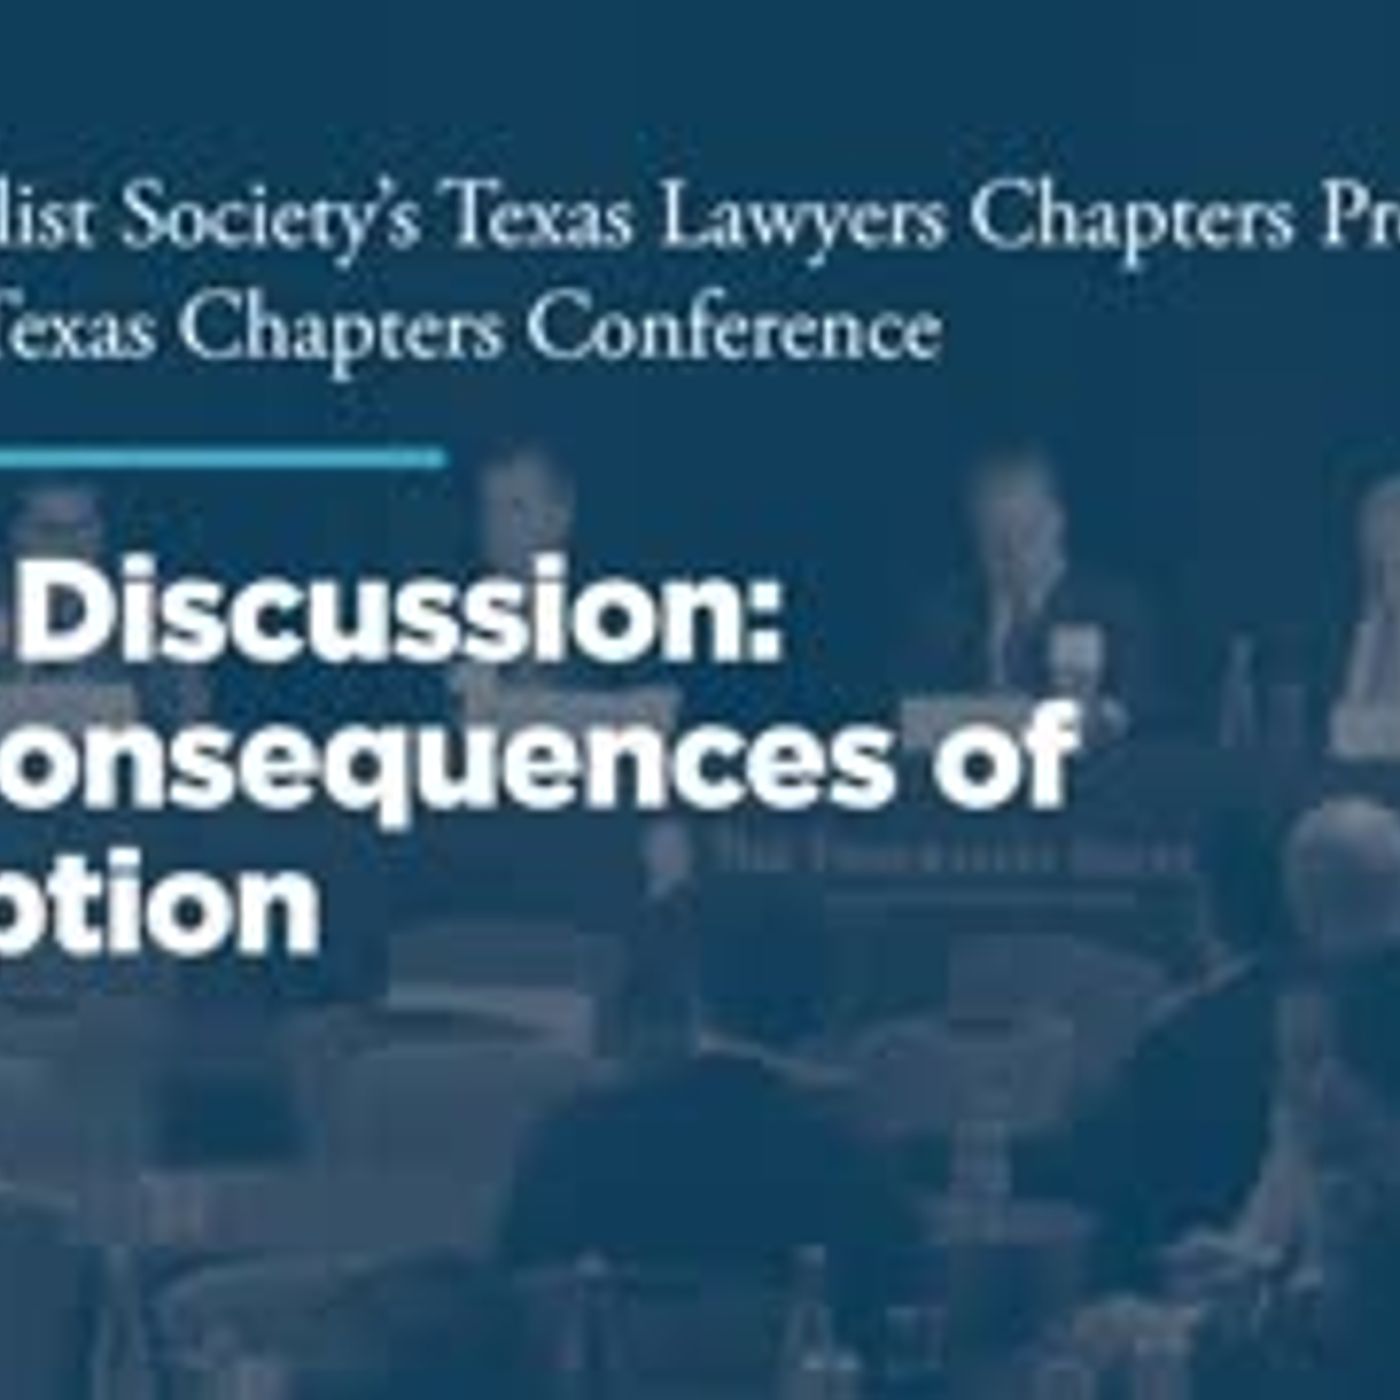 Panel Discussion: The Consequences of Disruption